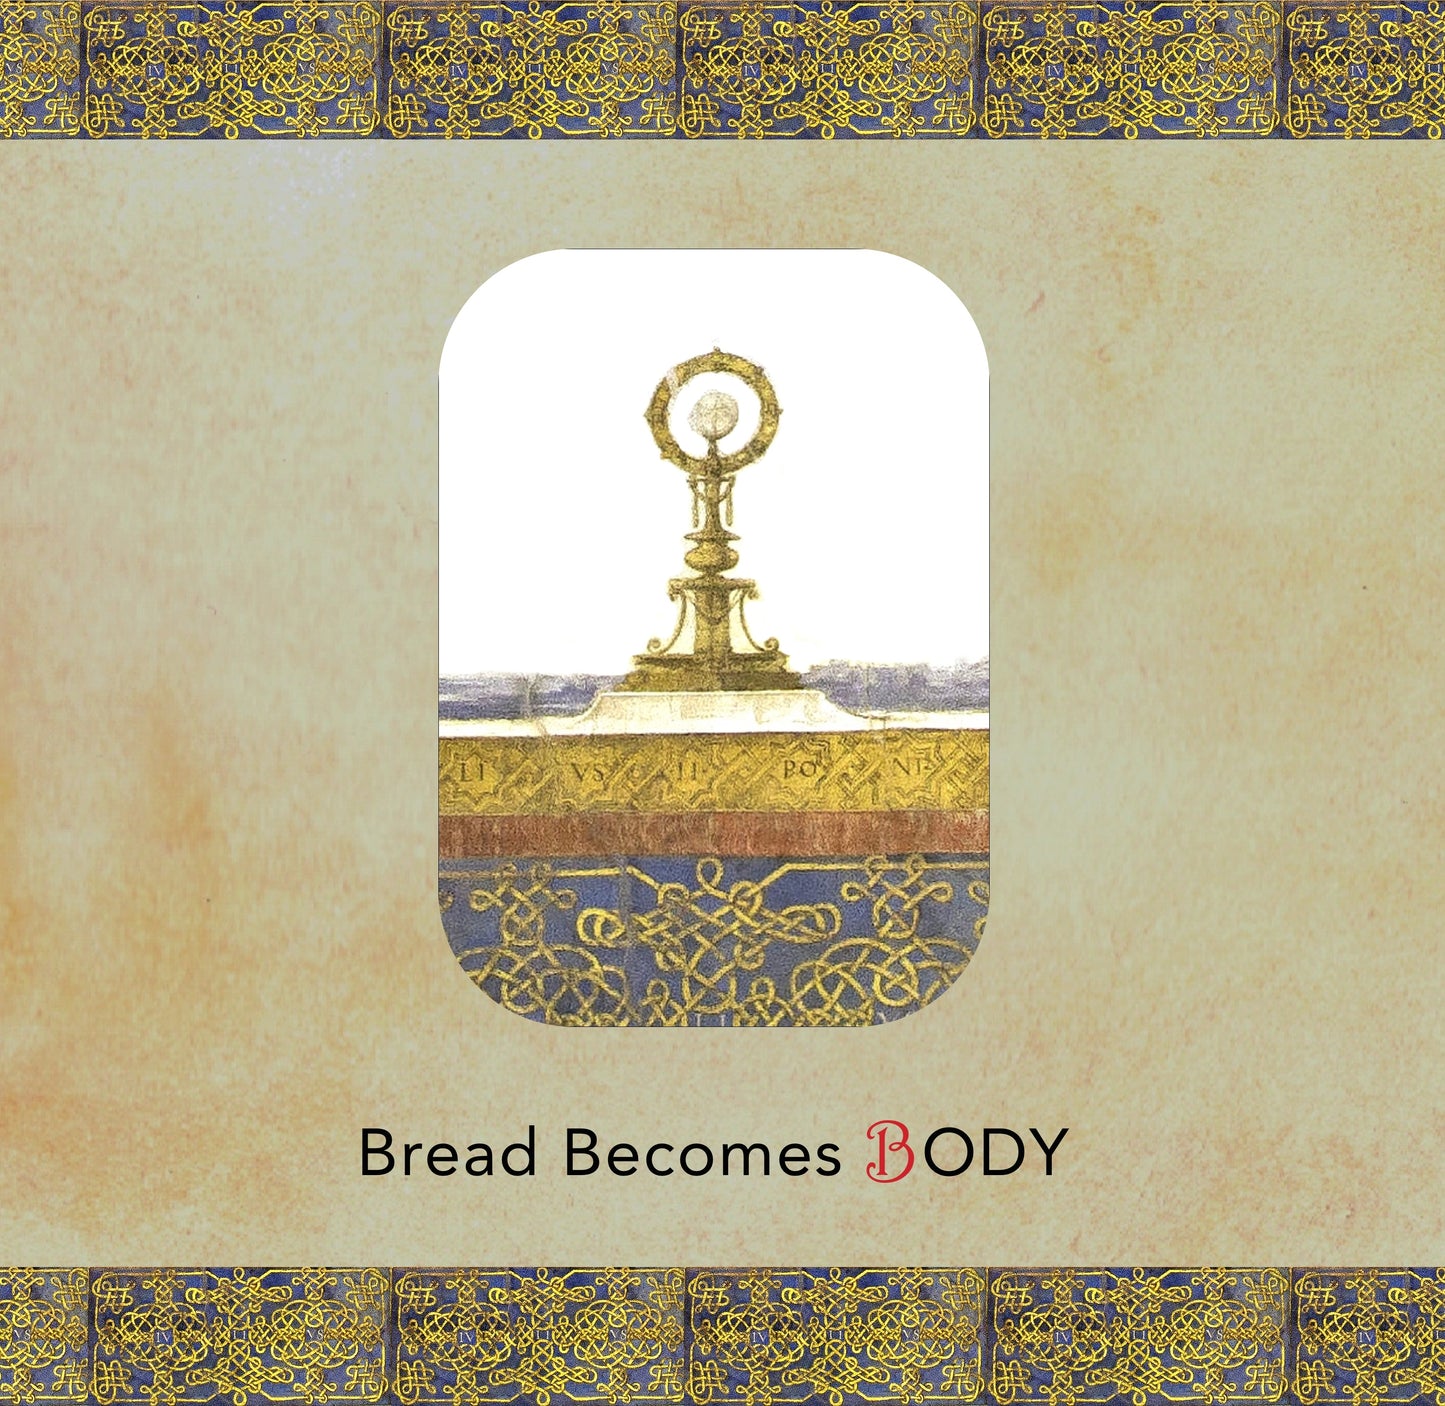 Bread Becomes BODY